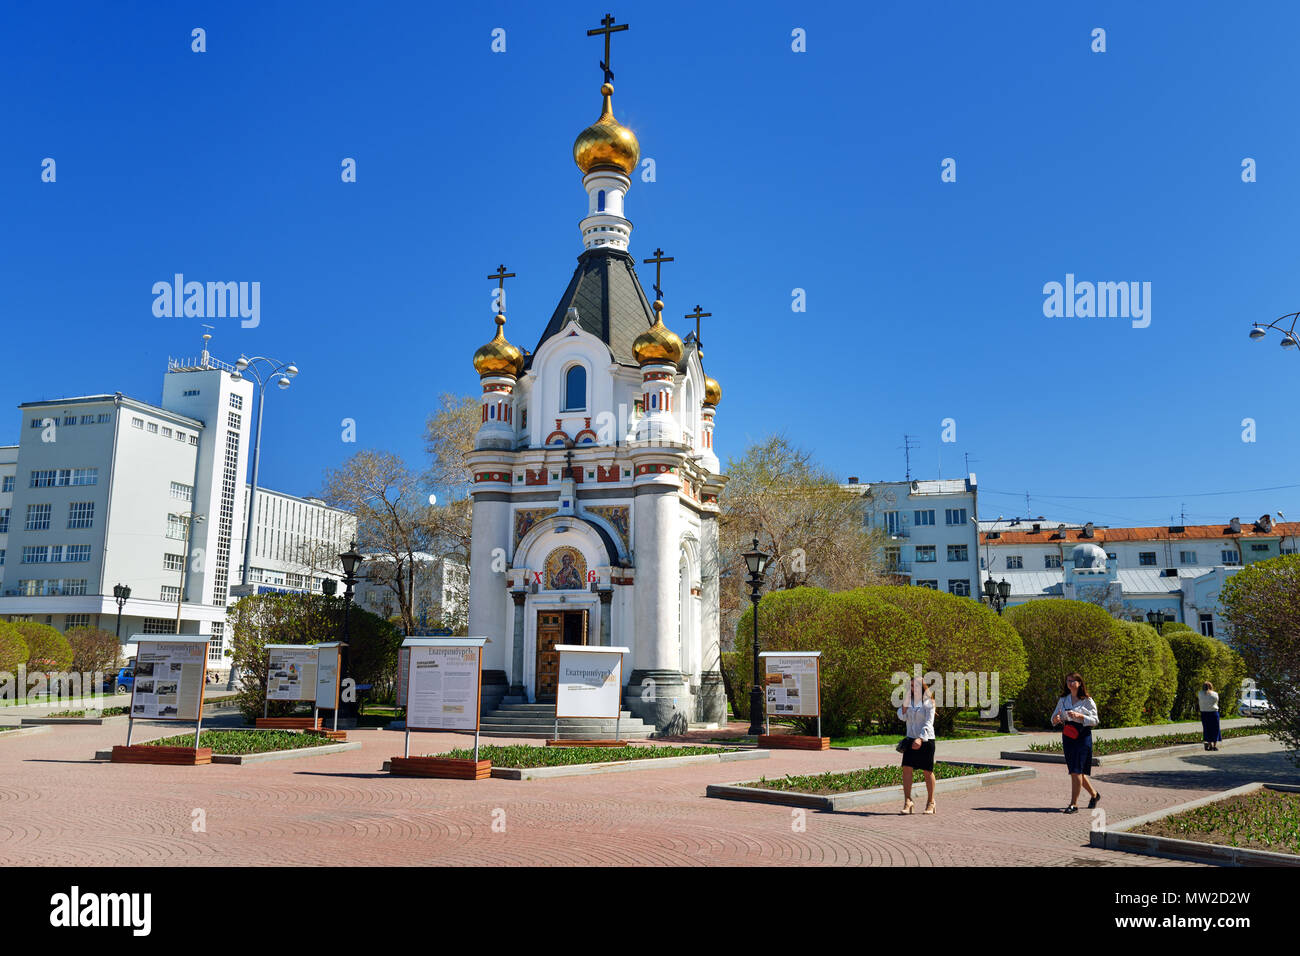 Yekaterinburg, Russia - May 23, 2018: Chapel of St. Catherine at the Labor square in center of city Stock Photo